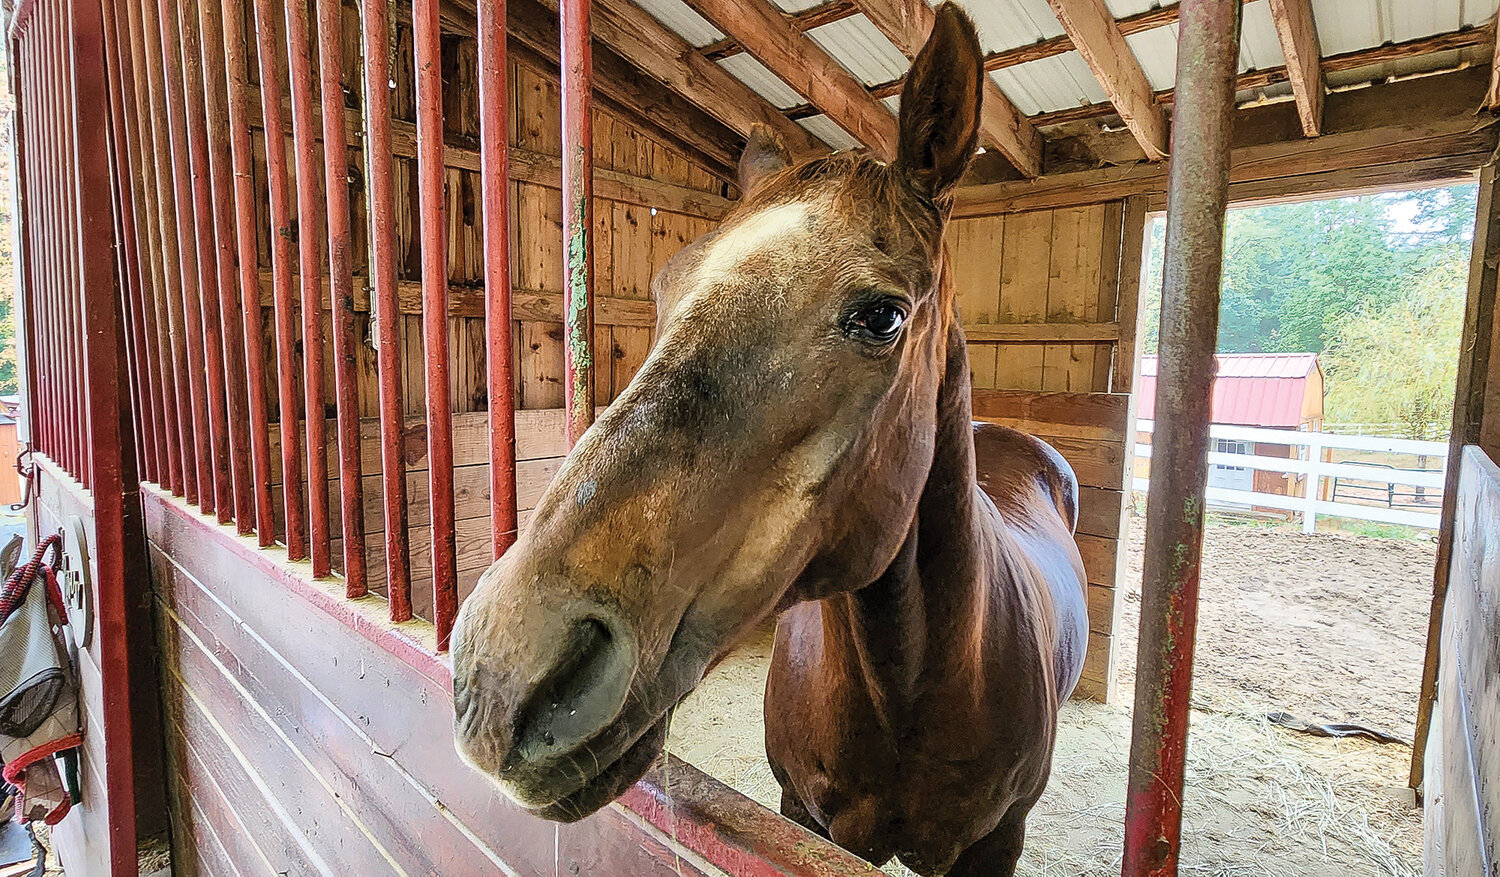 River, a therapy horse rescued from a feedlot by Grace Therapeutic Horse Program.